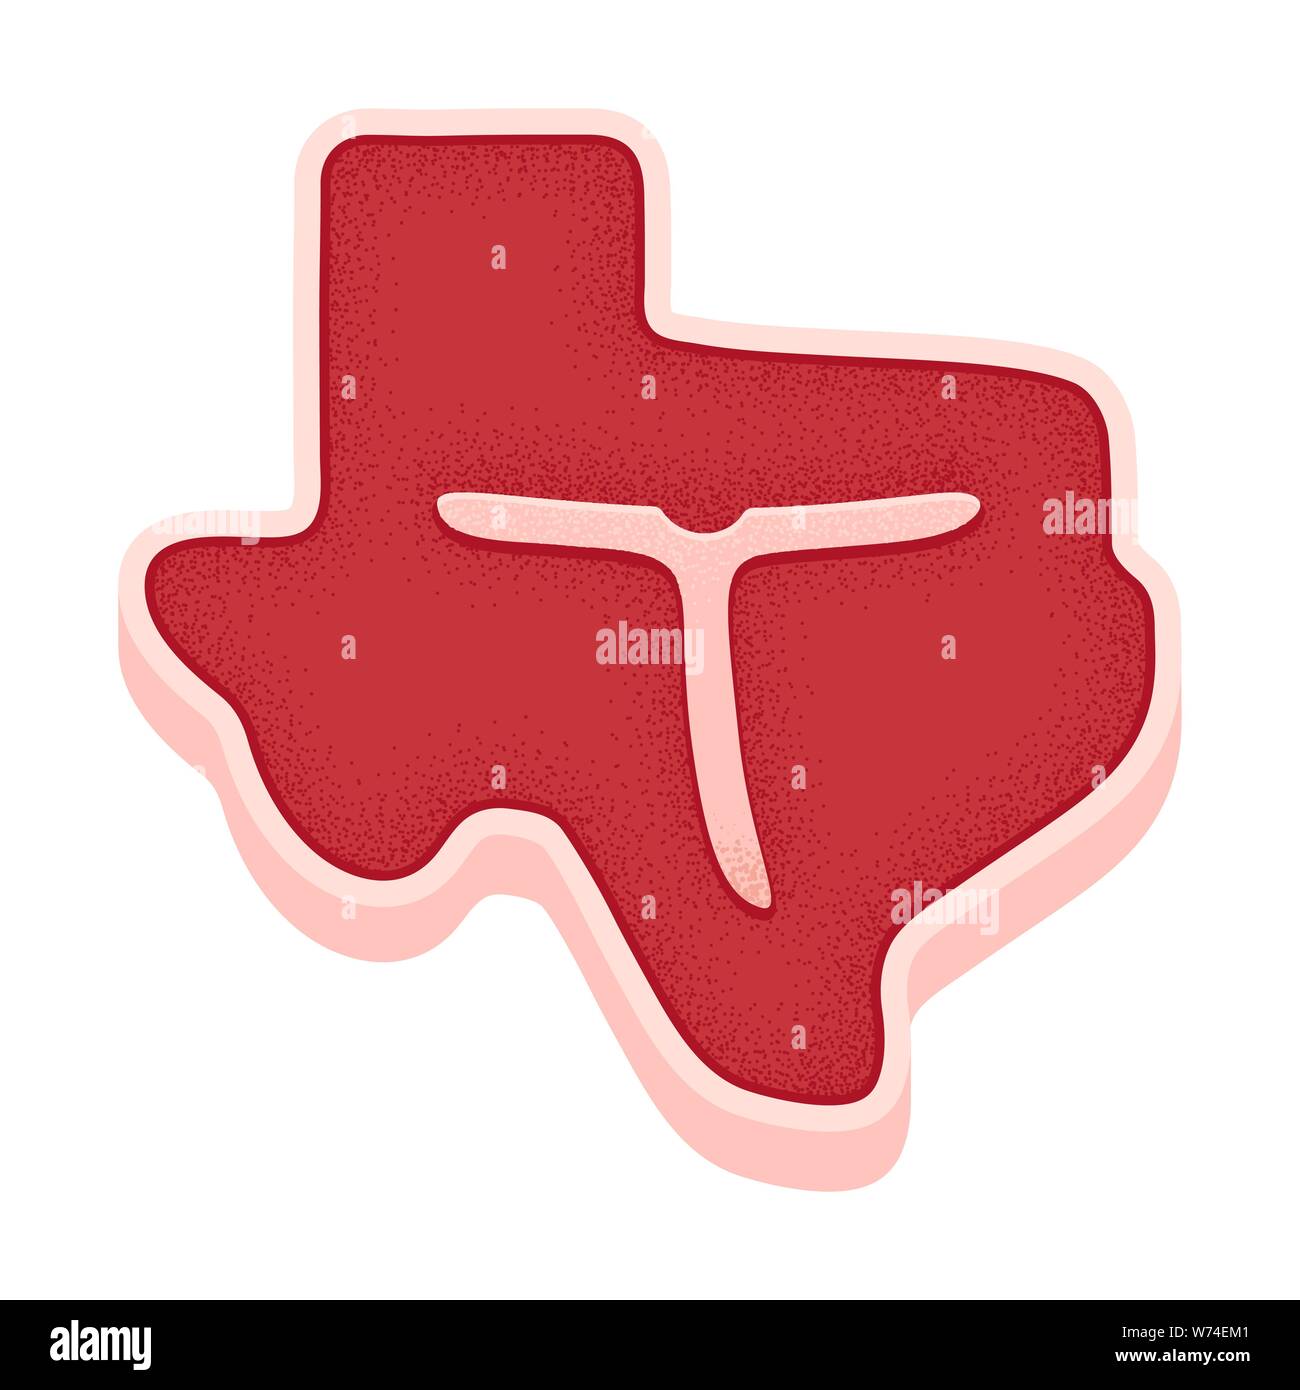 T-bone steak in shape of Texas map. Classic American bbq meat, vector clip art illustration. Vintage print texture. Stock Vector